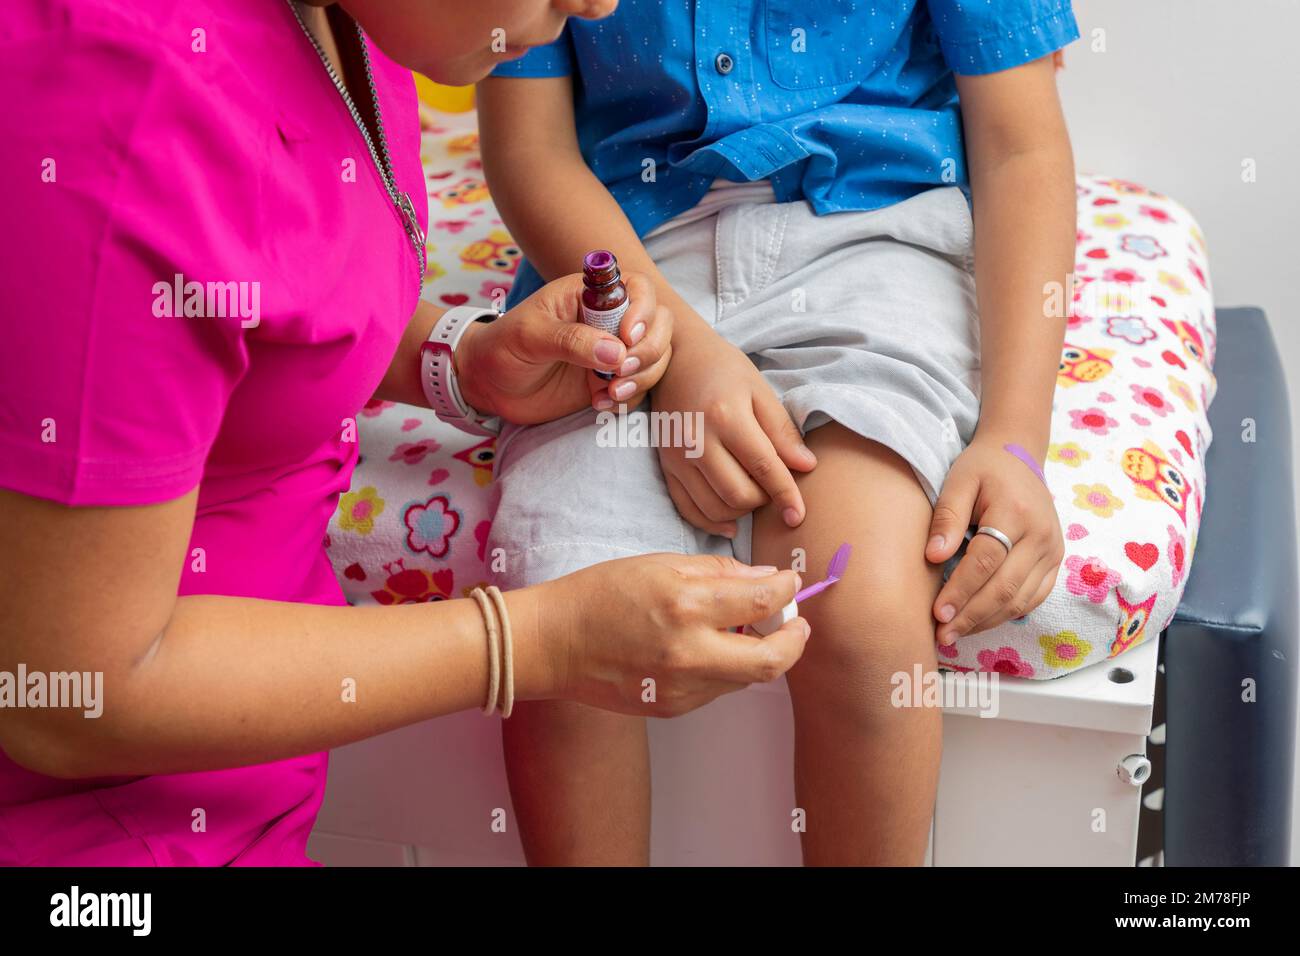 Unrecognizable female doctor is treating a child's knee in her medical office. Stock Photo